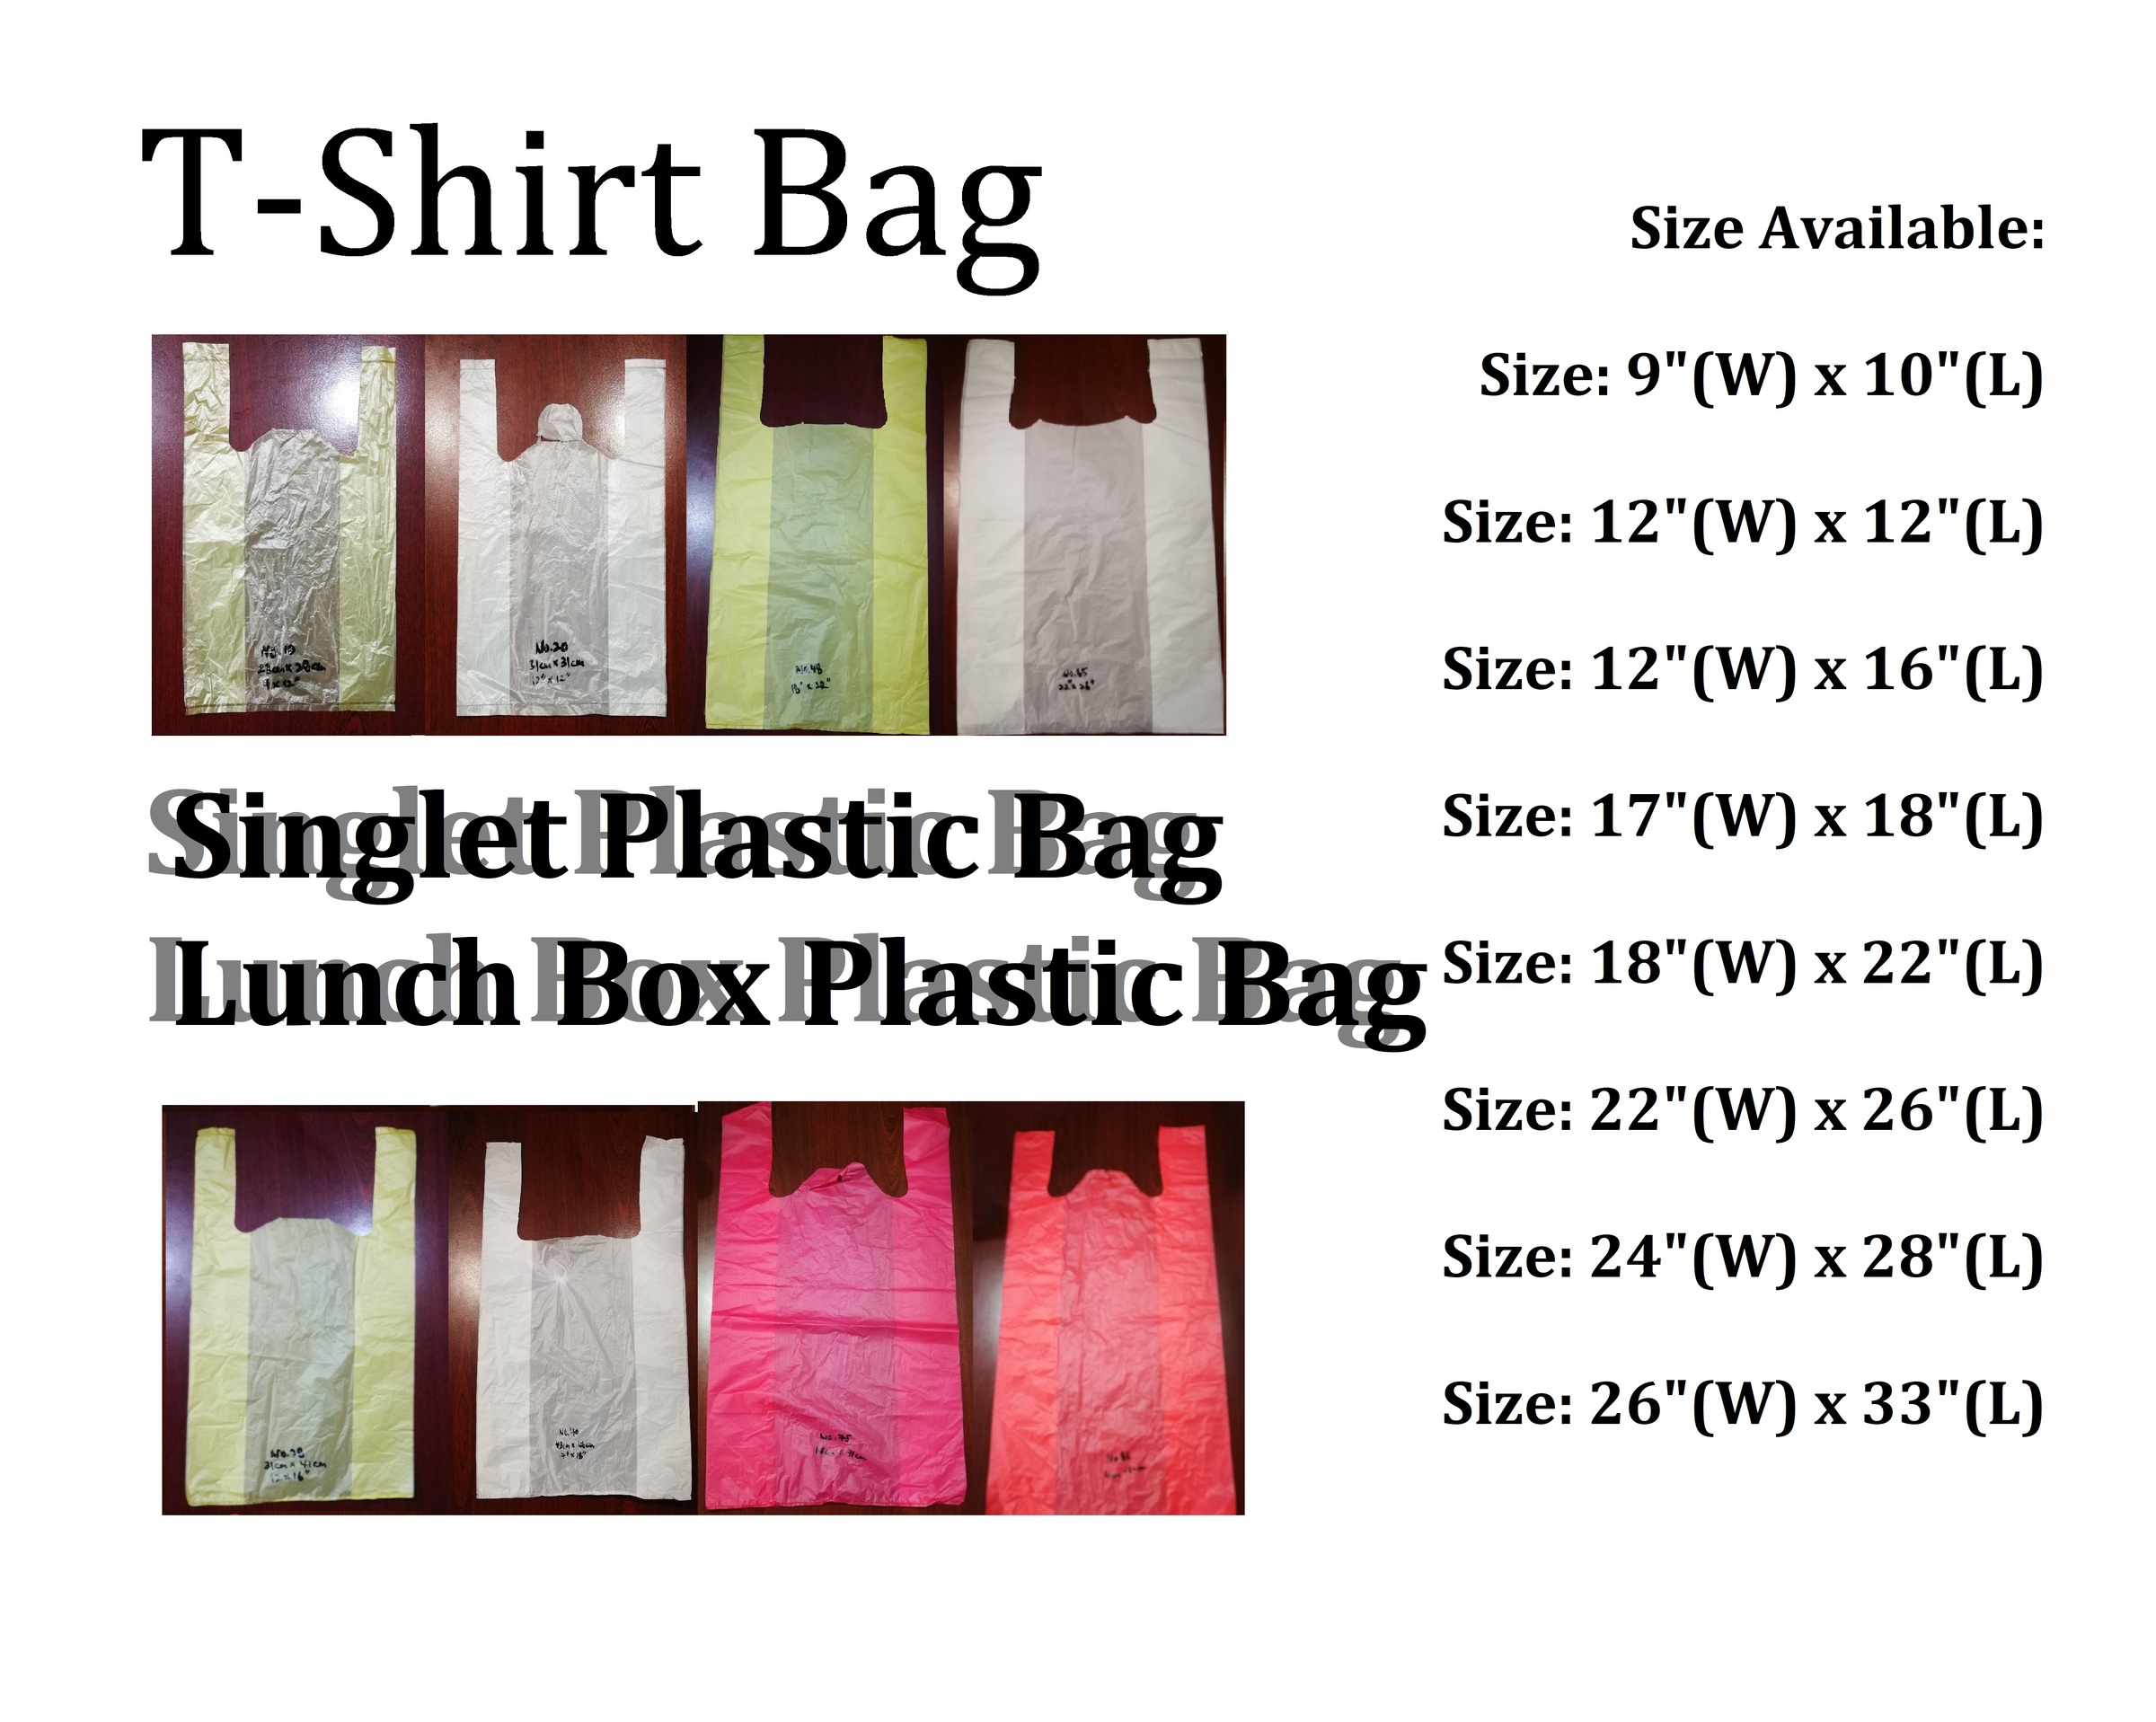 Amazon.com: 50pc Travel Storage Bags,Clothes Packaging Bags for  Shipping,T-Shirt Bags,3mil Horizontal Packaging Bags with Vent Hole, Fast Resealable  Poly Plastic Merchandise Zip Bags (10x10“) : Industrial & Scientific